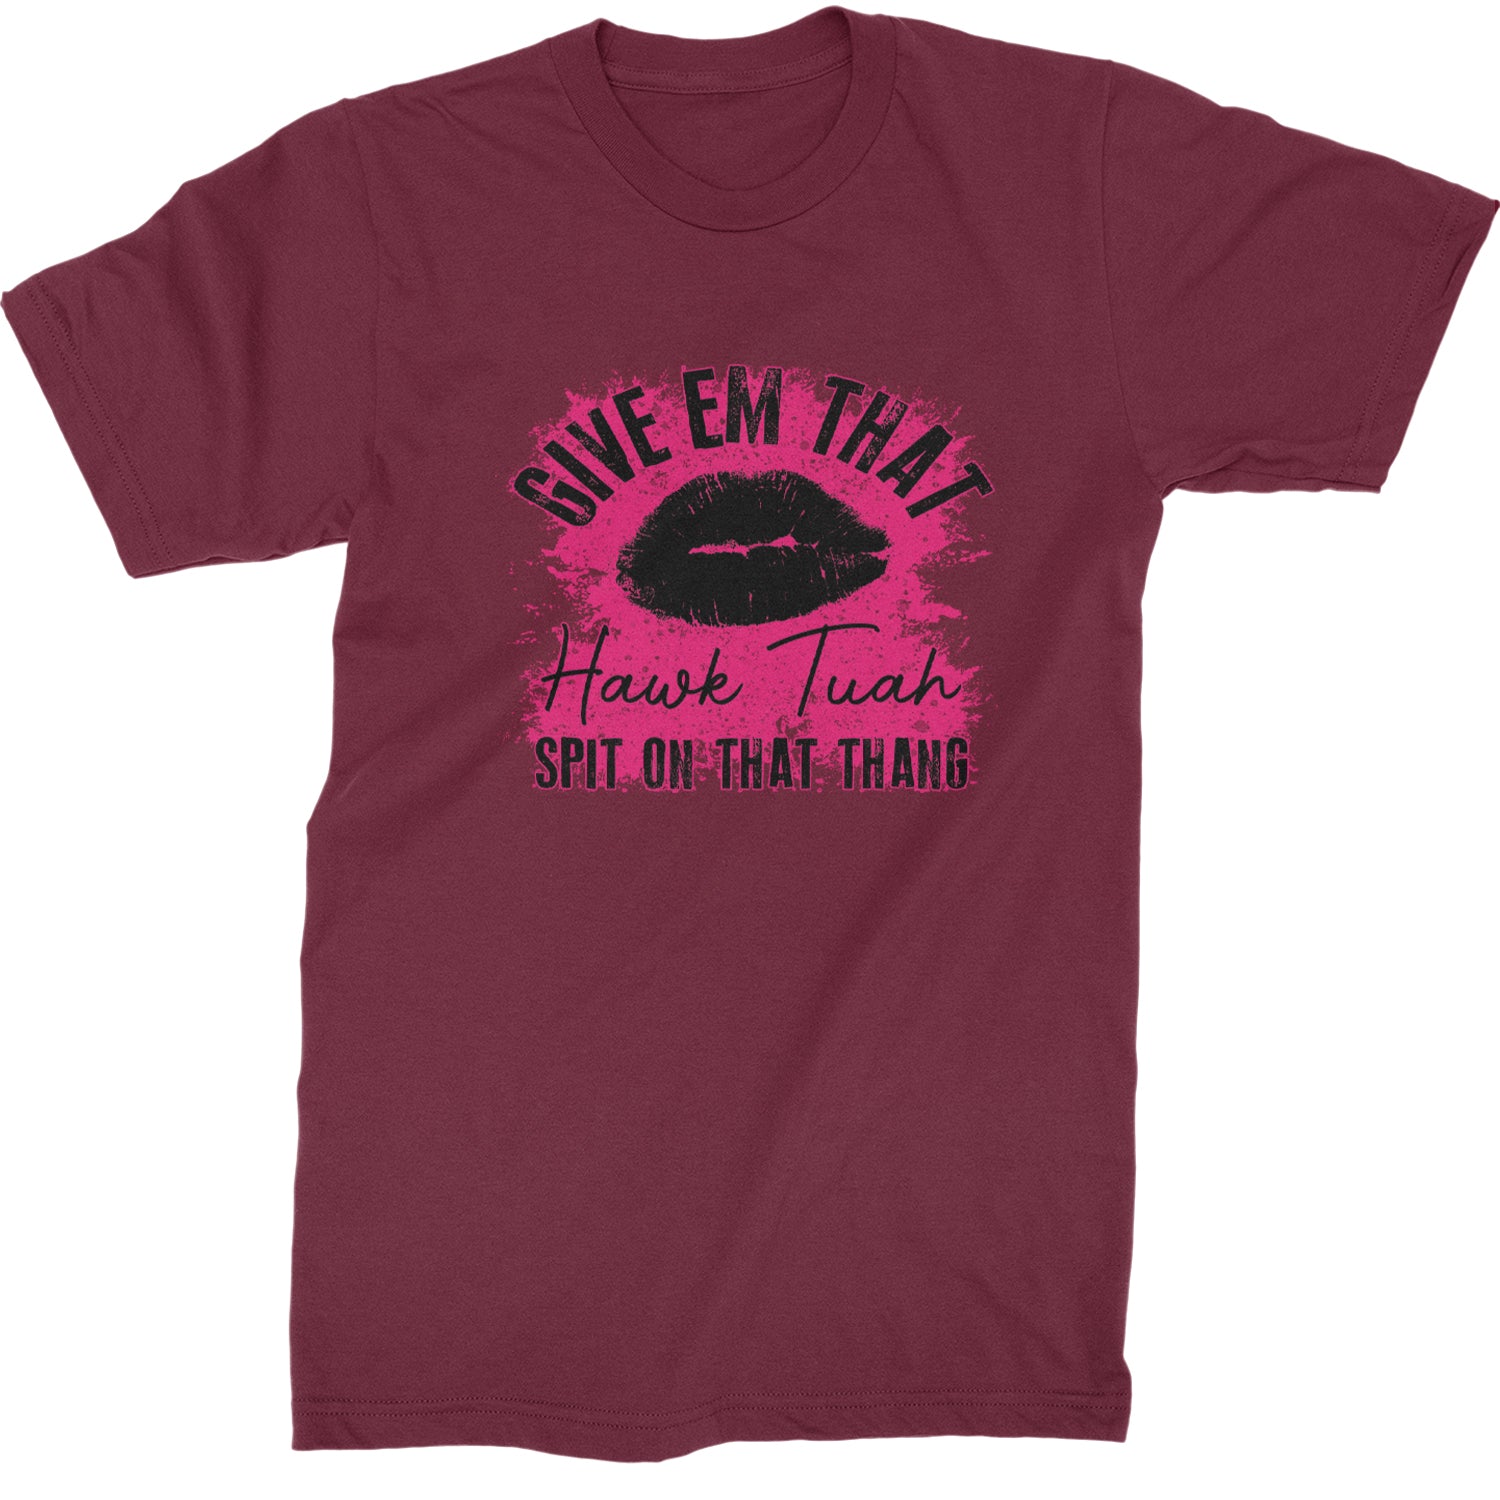 Give 'Em Hawk Tuah Spit On That Thang Mens T-shirt Maroon